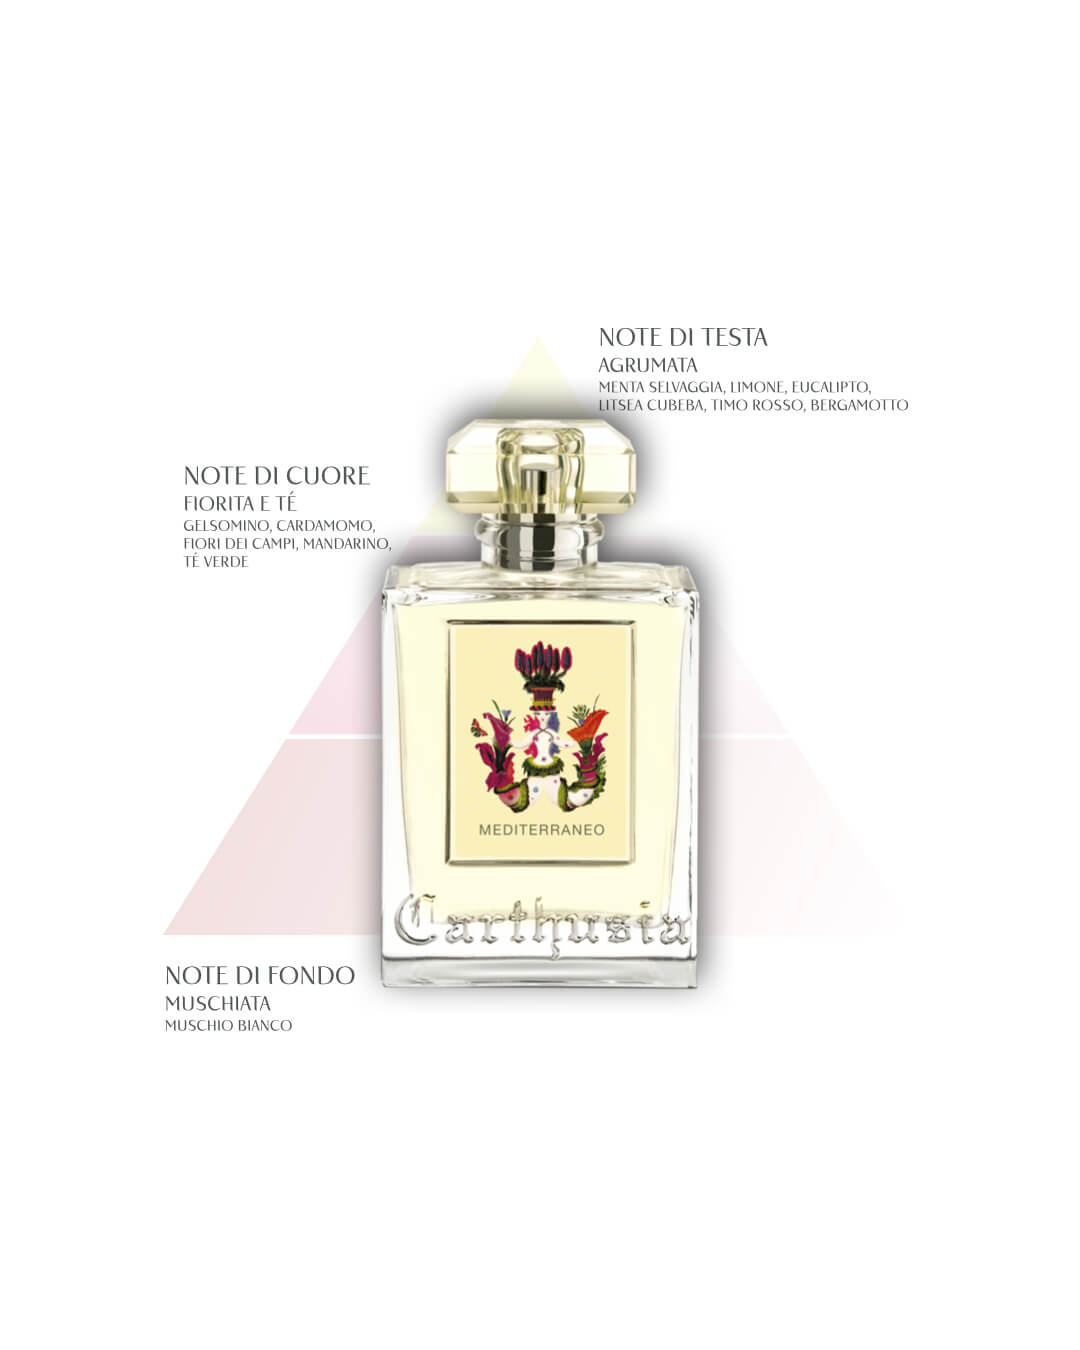 An elegant Carthusia I Profumi de Capri Mediterraneo Reed Diffuser - 500ml bottle labeled "mediterraneo" with a detailed floral design on its label, placed against a soft pink background with descriptive text about its fragrance notes, reminiscent of a casa fragrant